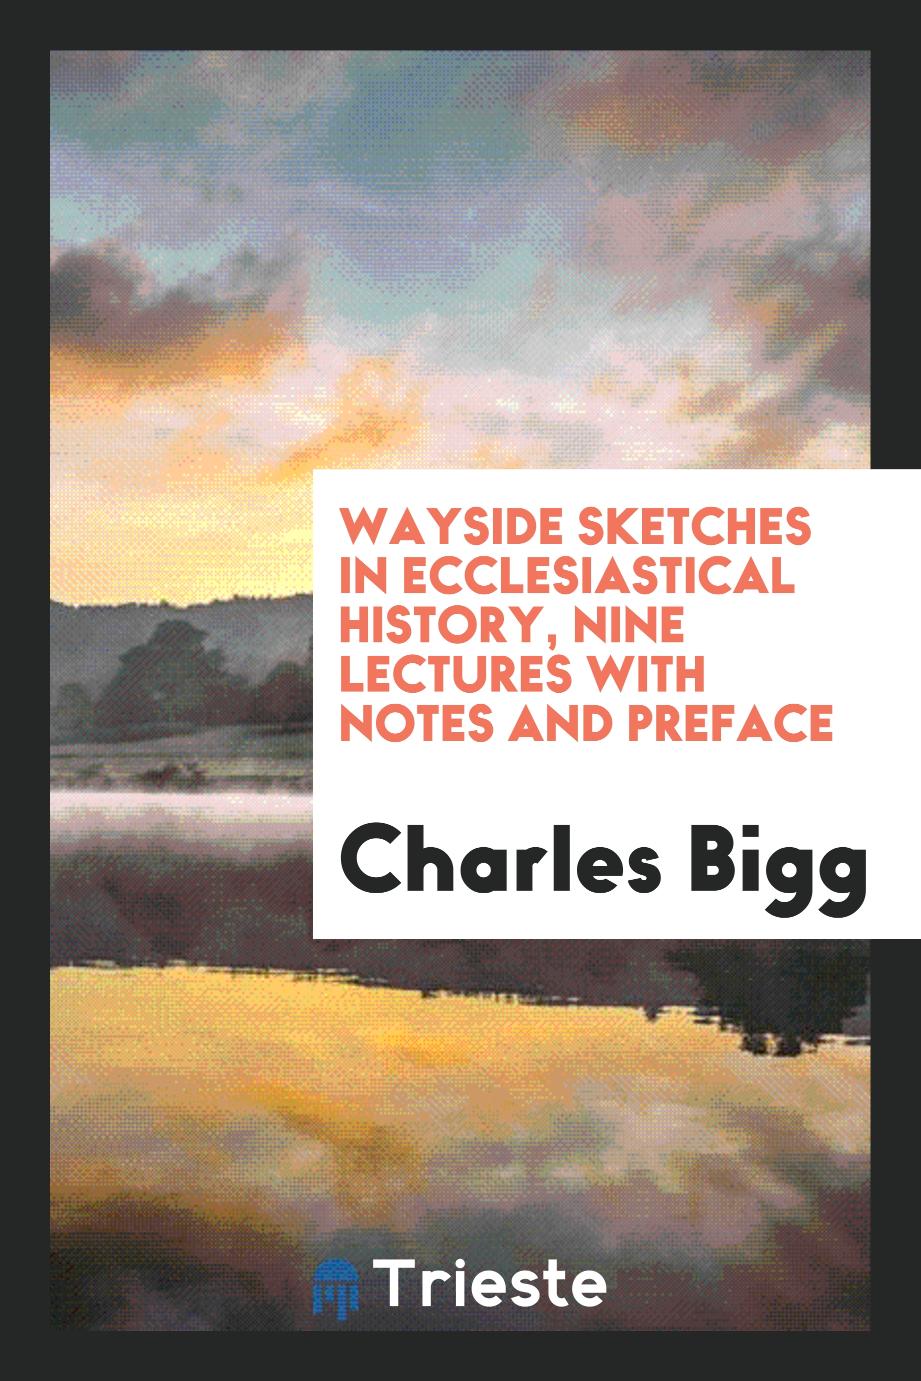 Wayside sketches in ecclesiastical history, nine lectures with notes and preface